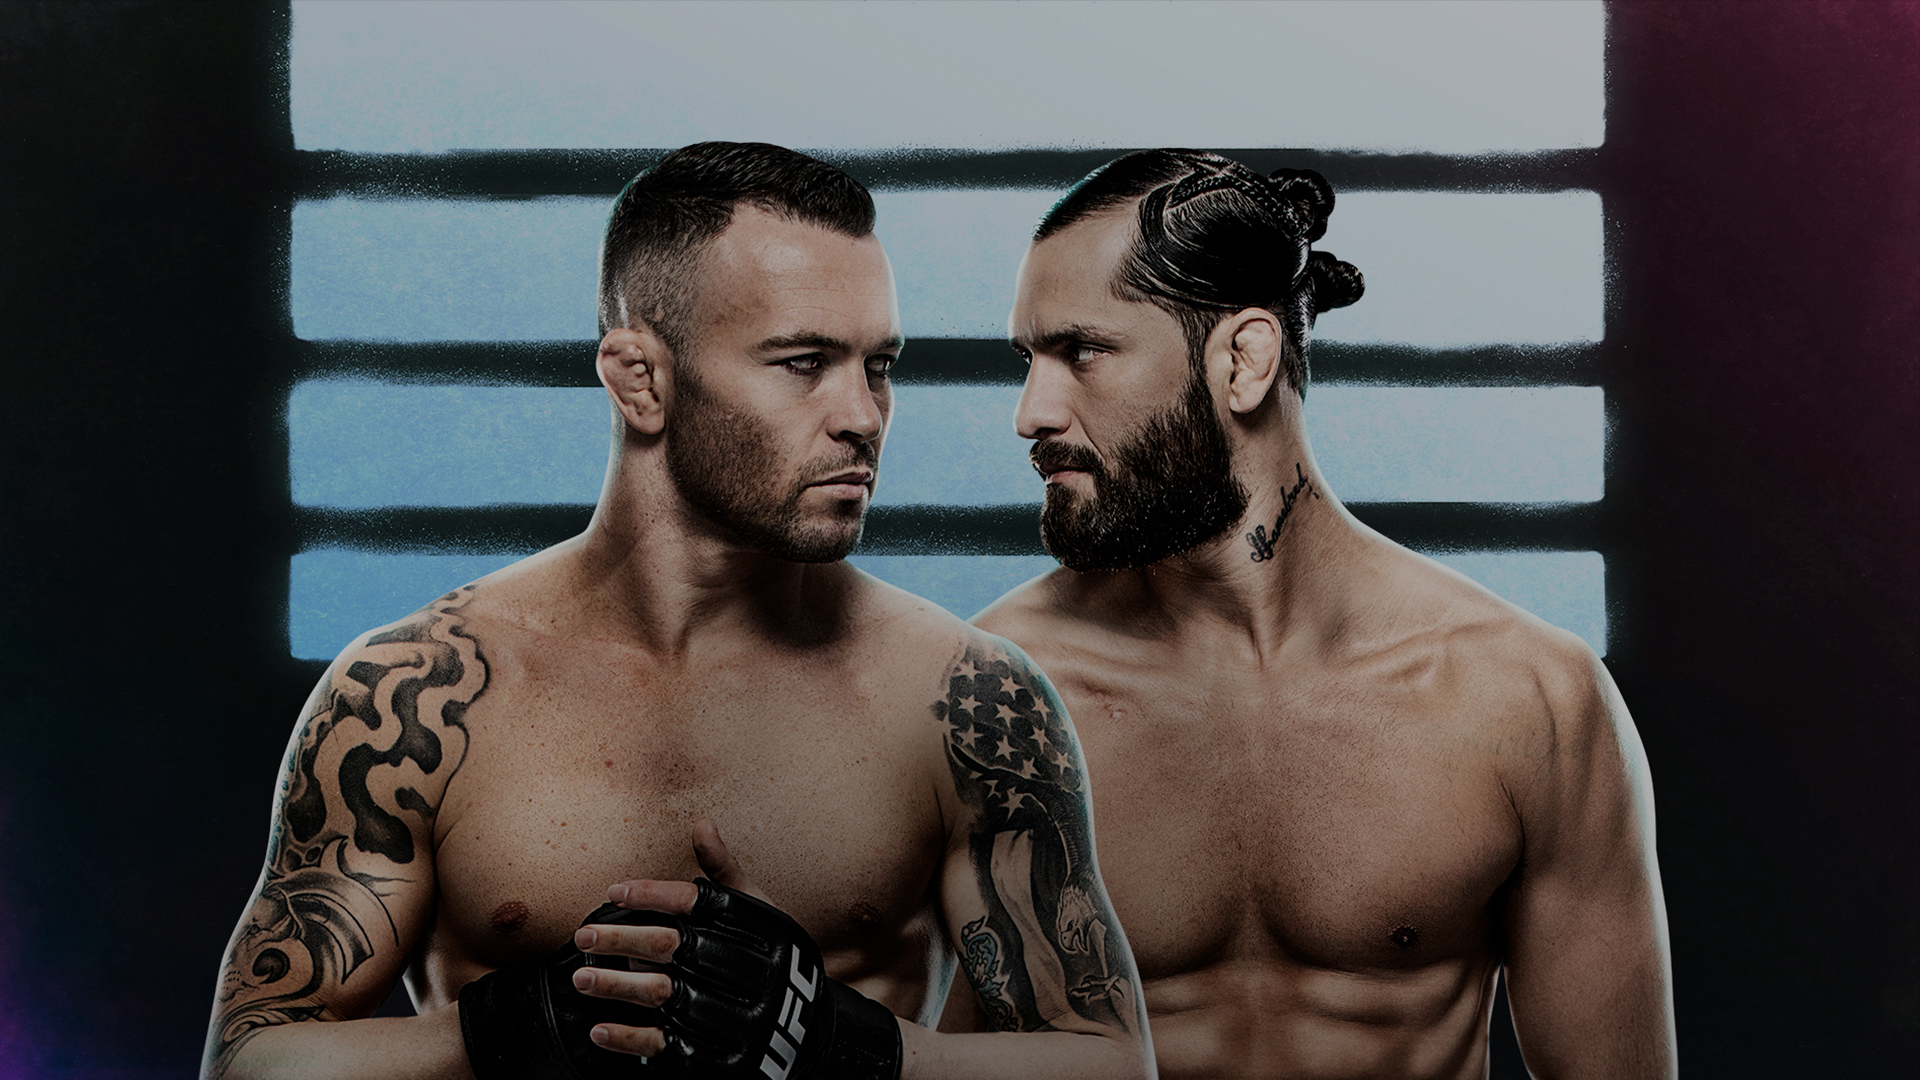 How to Watch UFC 272: Covington vs. Masvidal on Roku, Fire TV, Apple TV & More on March 5